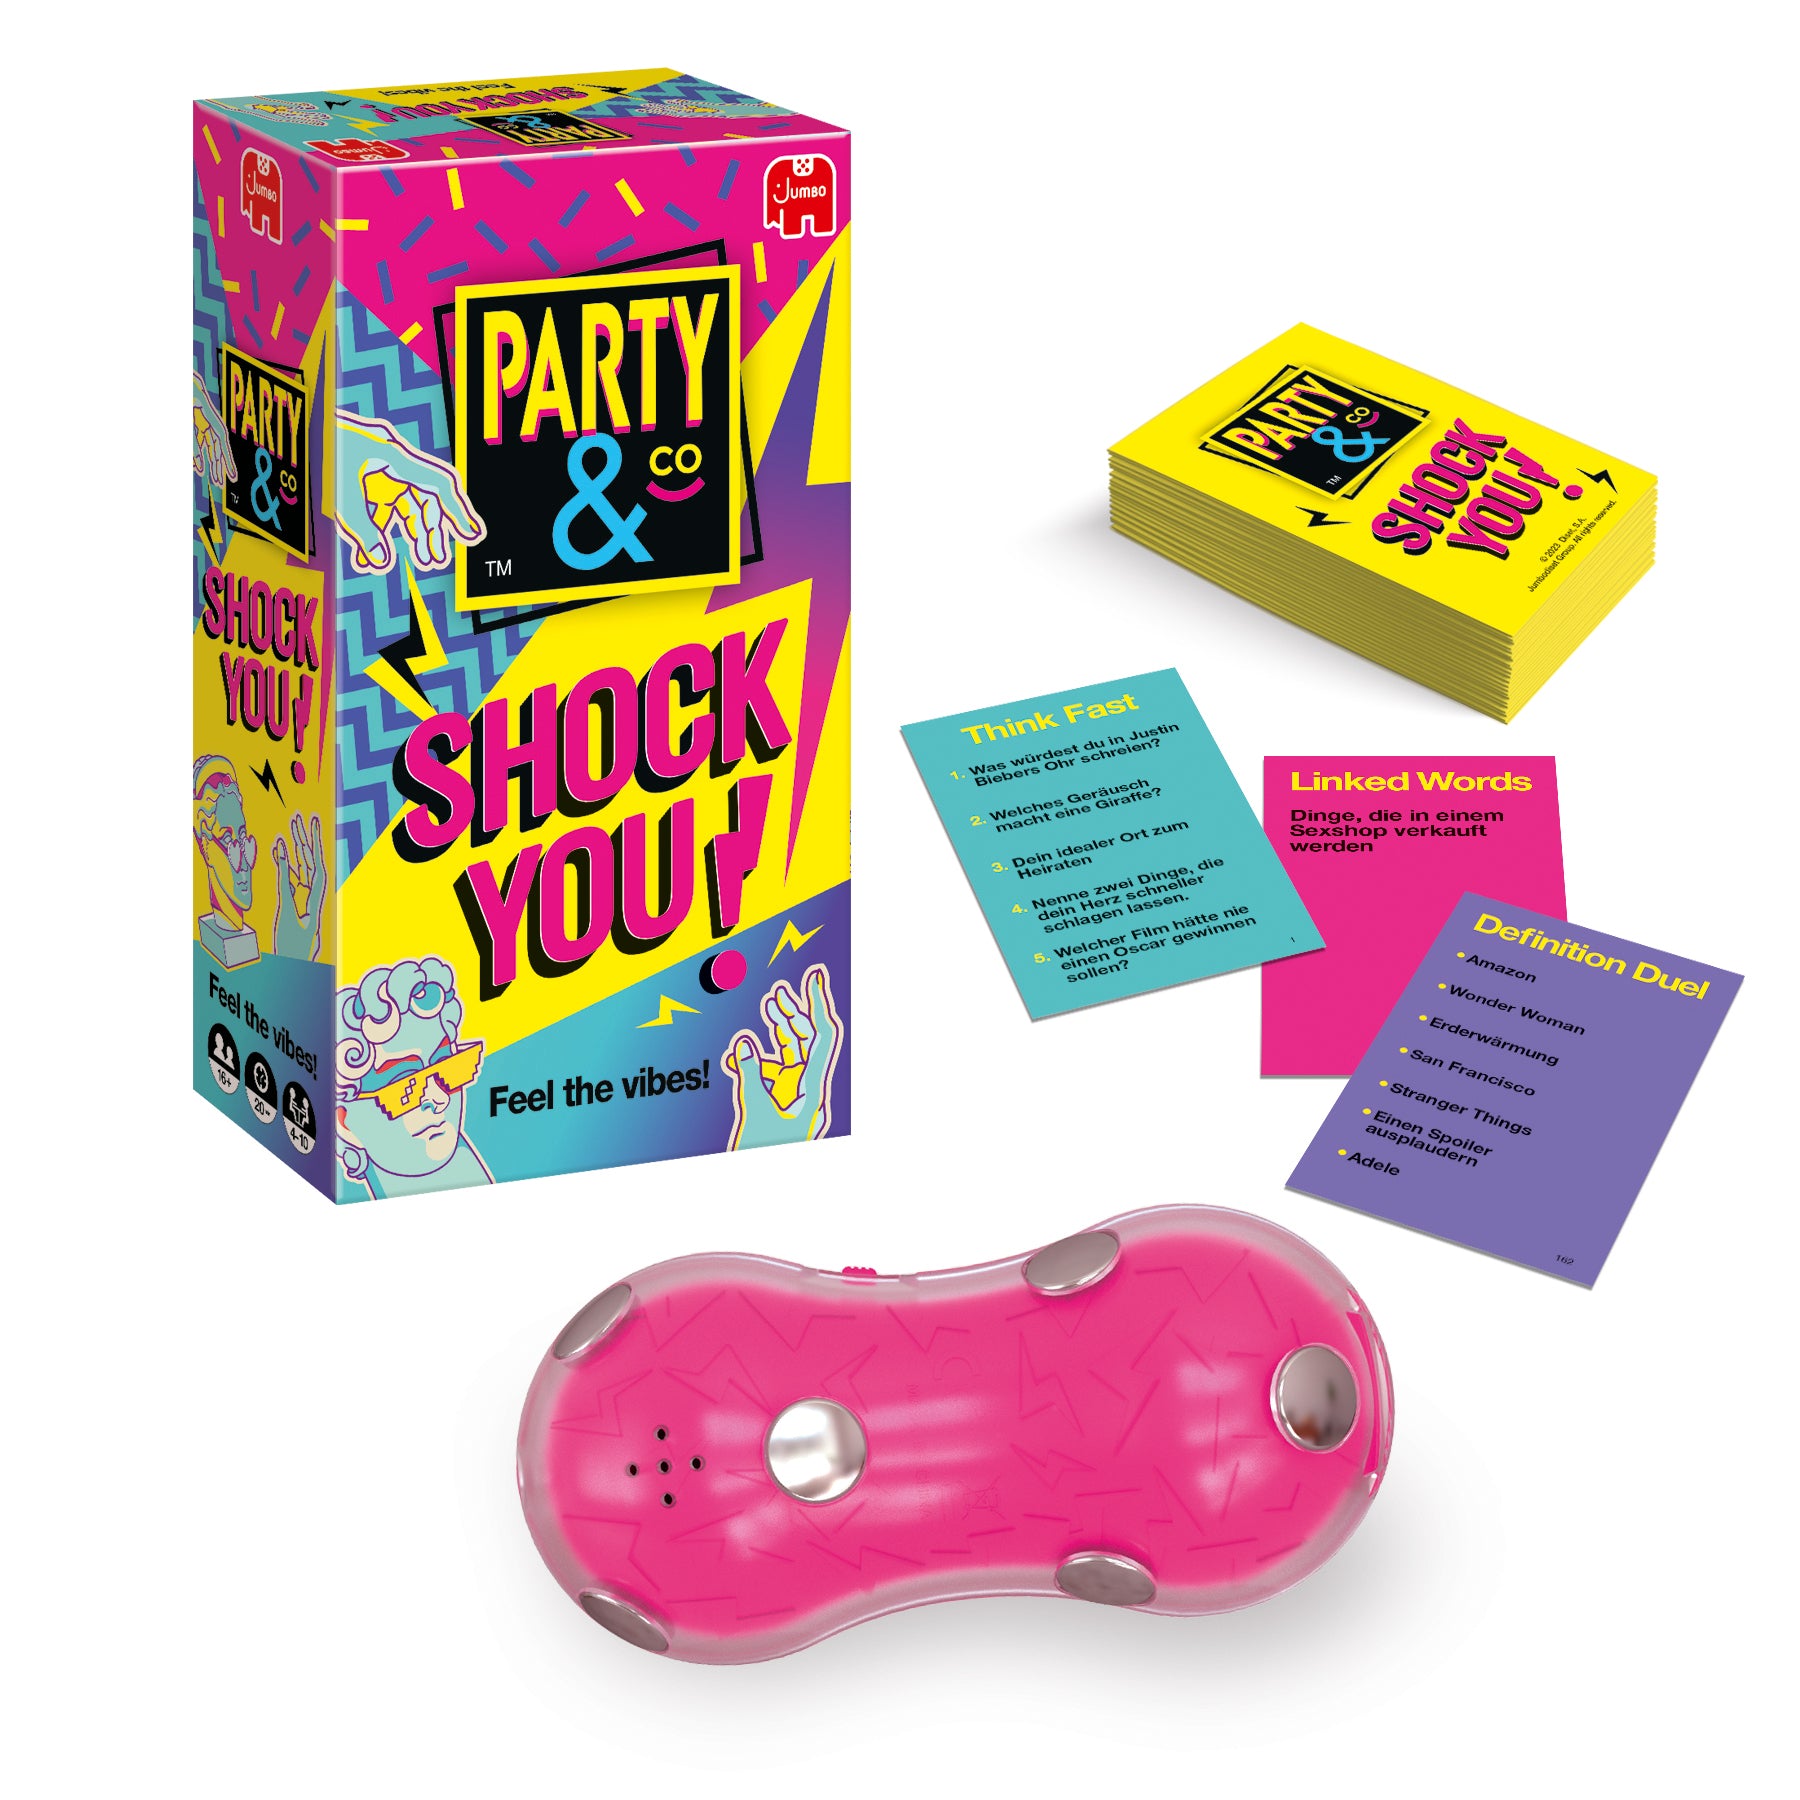 Party & Co. Shock You DACH - product image - Jumboplay.com